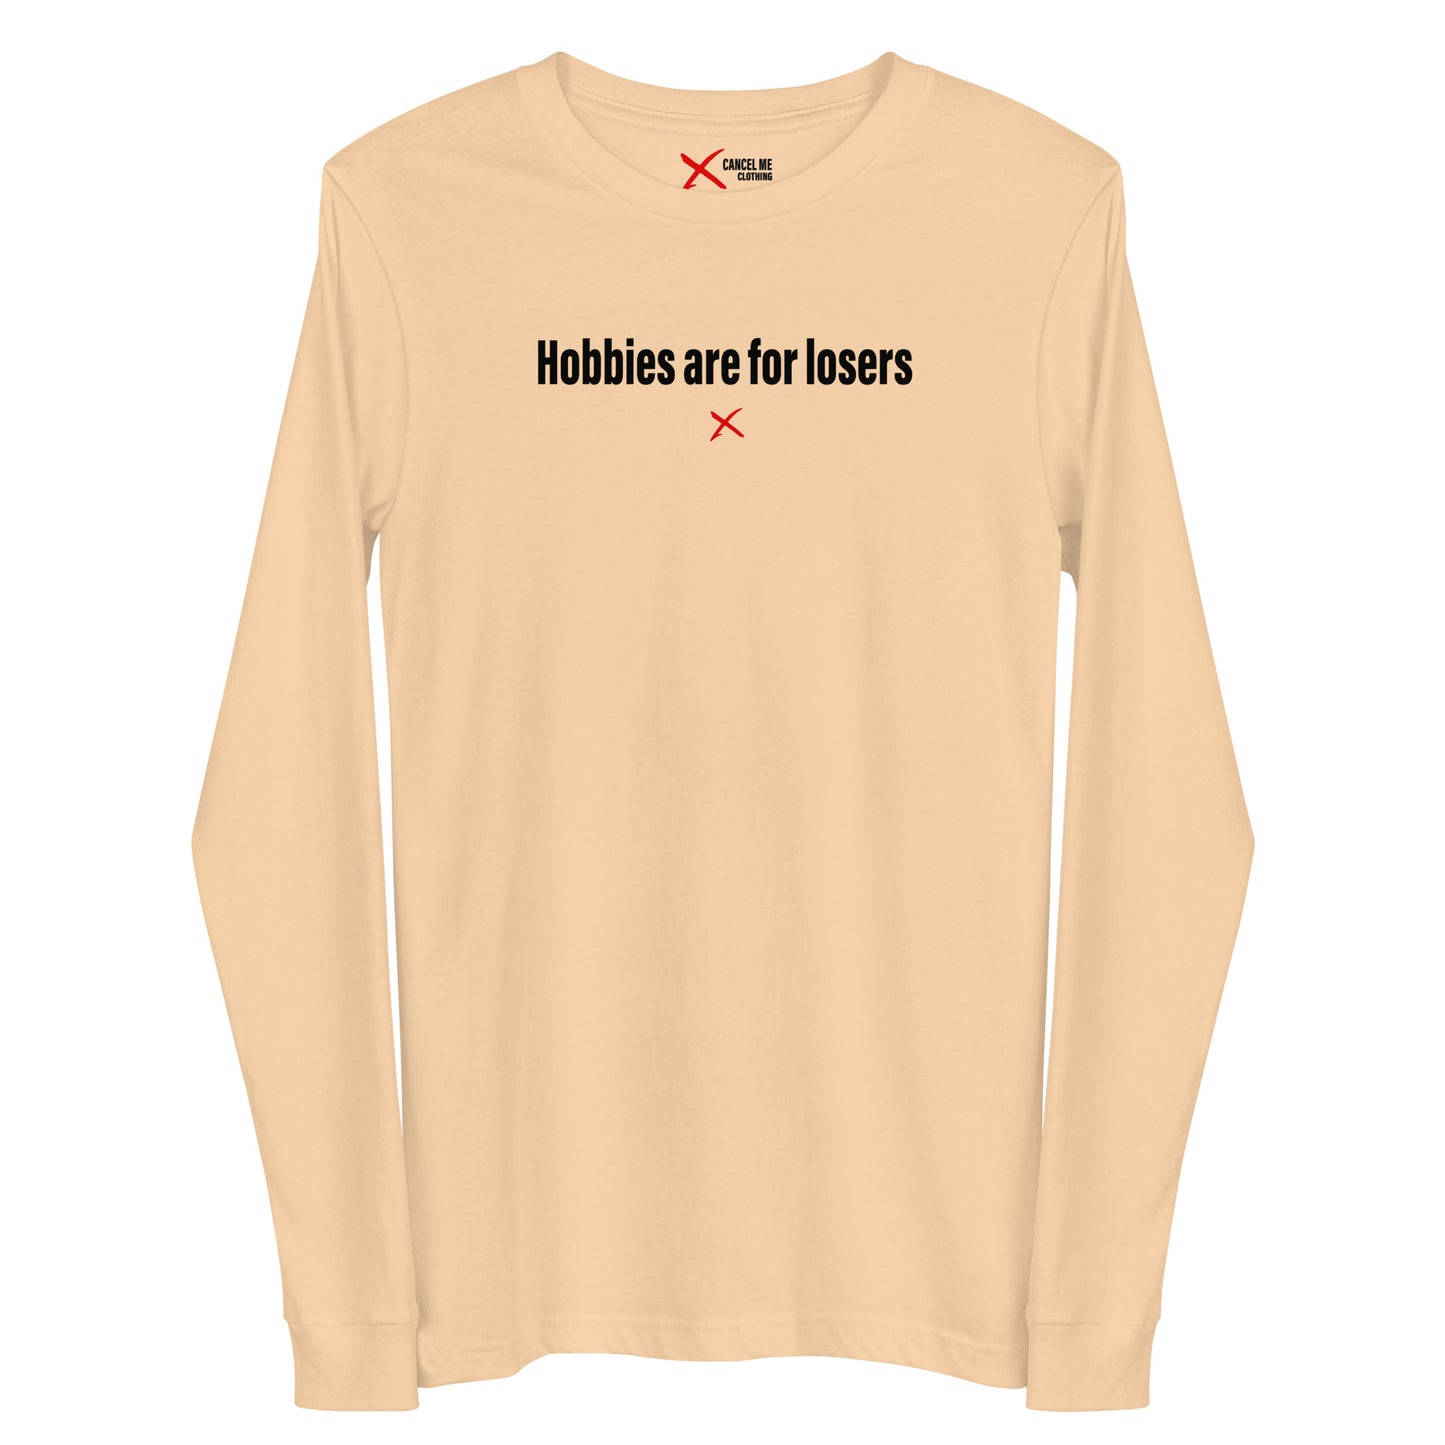 Hobbies are for losers - Longsleeve